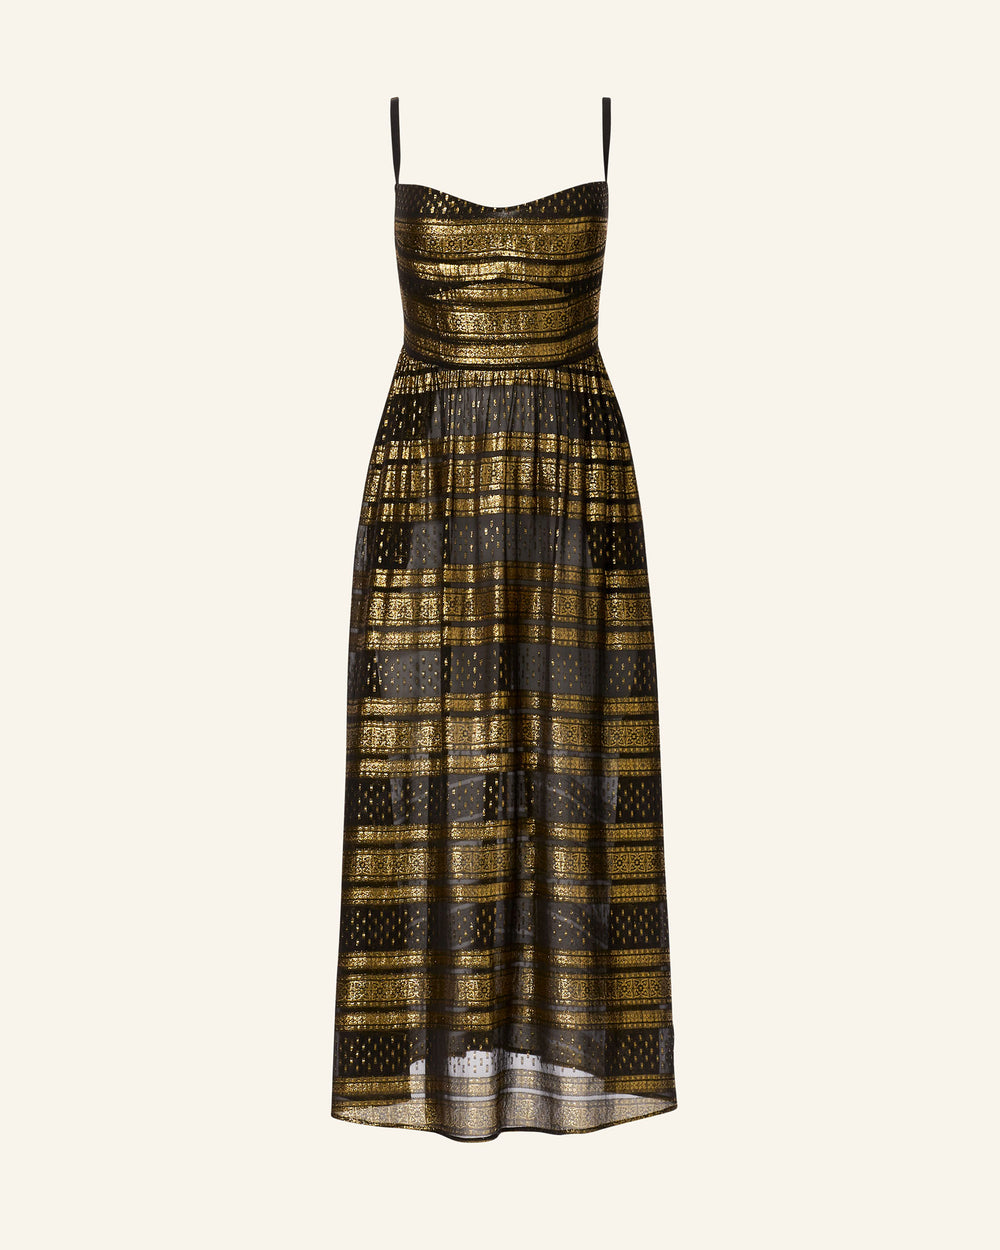 Autumn Gilded Lily Dress